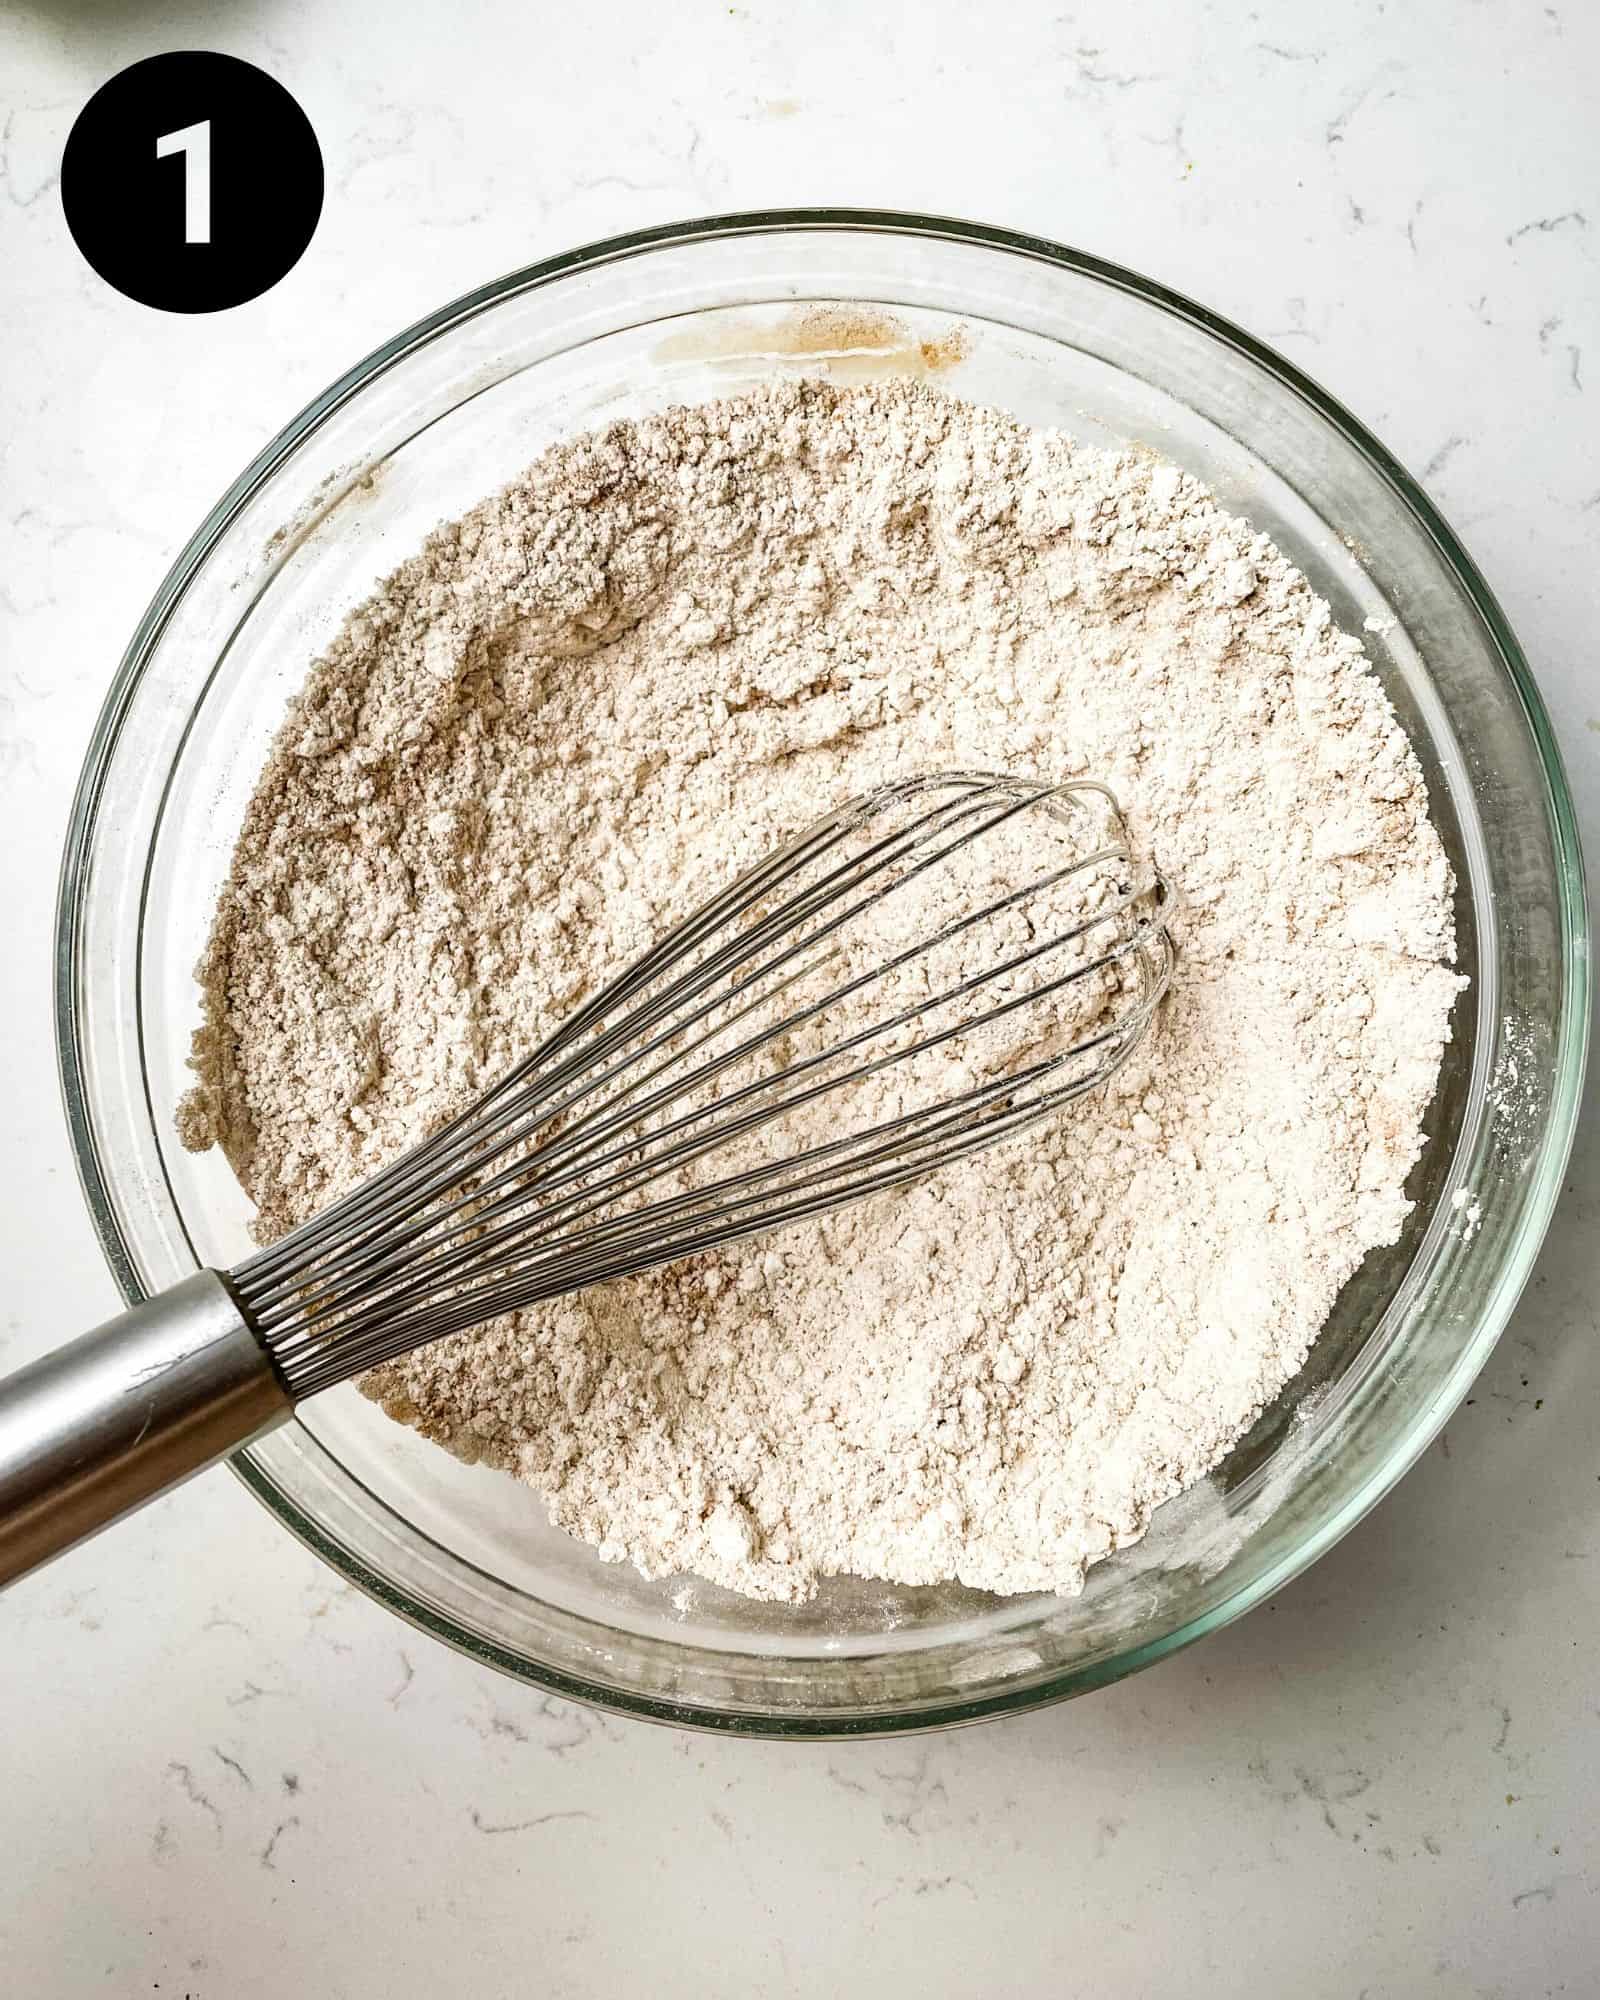 flour, spices, baking soda, and baking powder whisked together in a bowl.